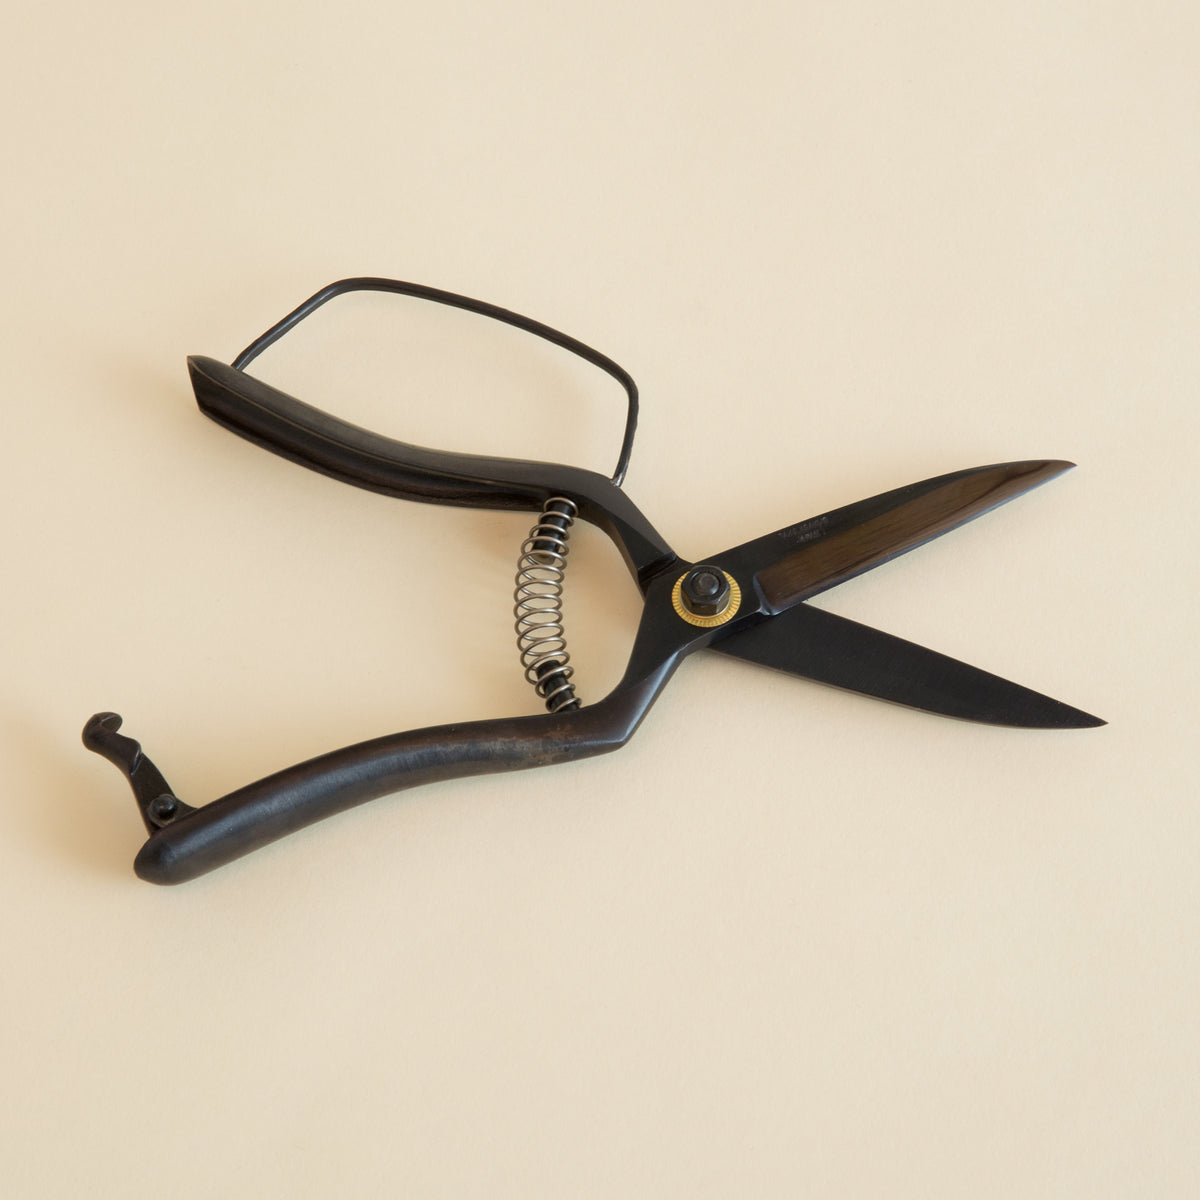 Landscaping Shears - 250mm